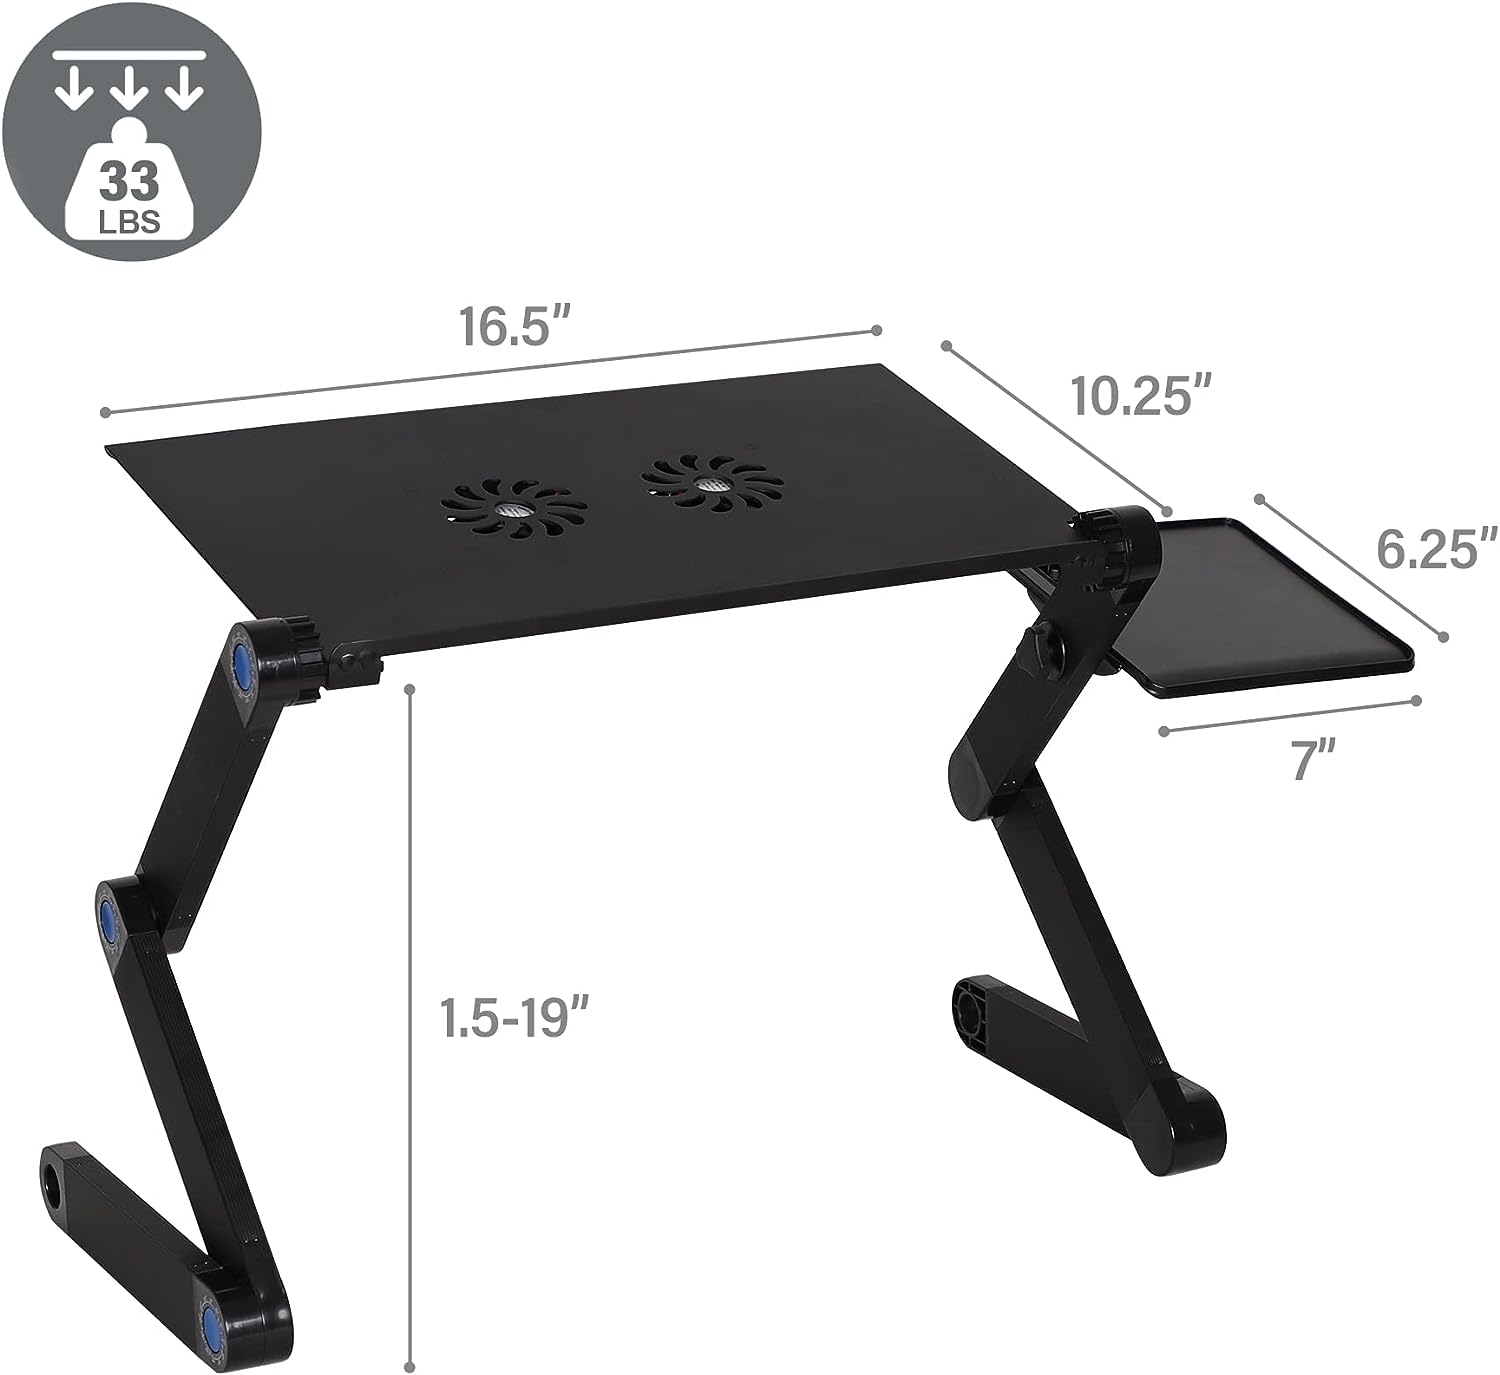 Foldable Aluminum Laptop Desk Adjustable Portable Table Stand with 2 CPU Cooling Fans and Mouse Pad